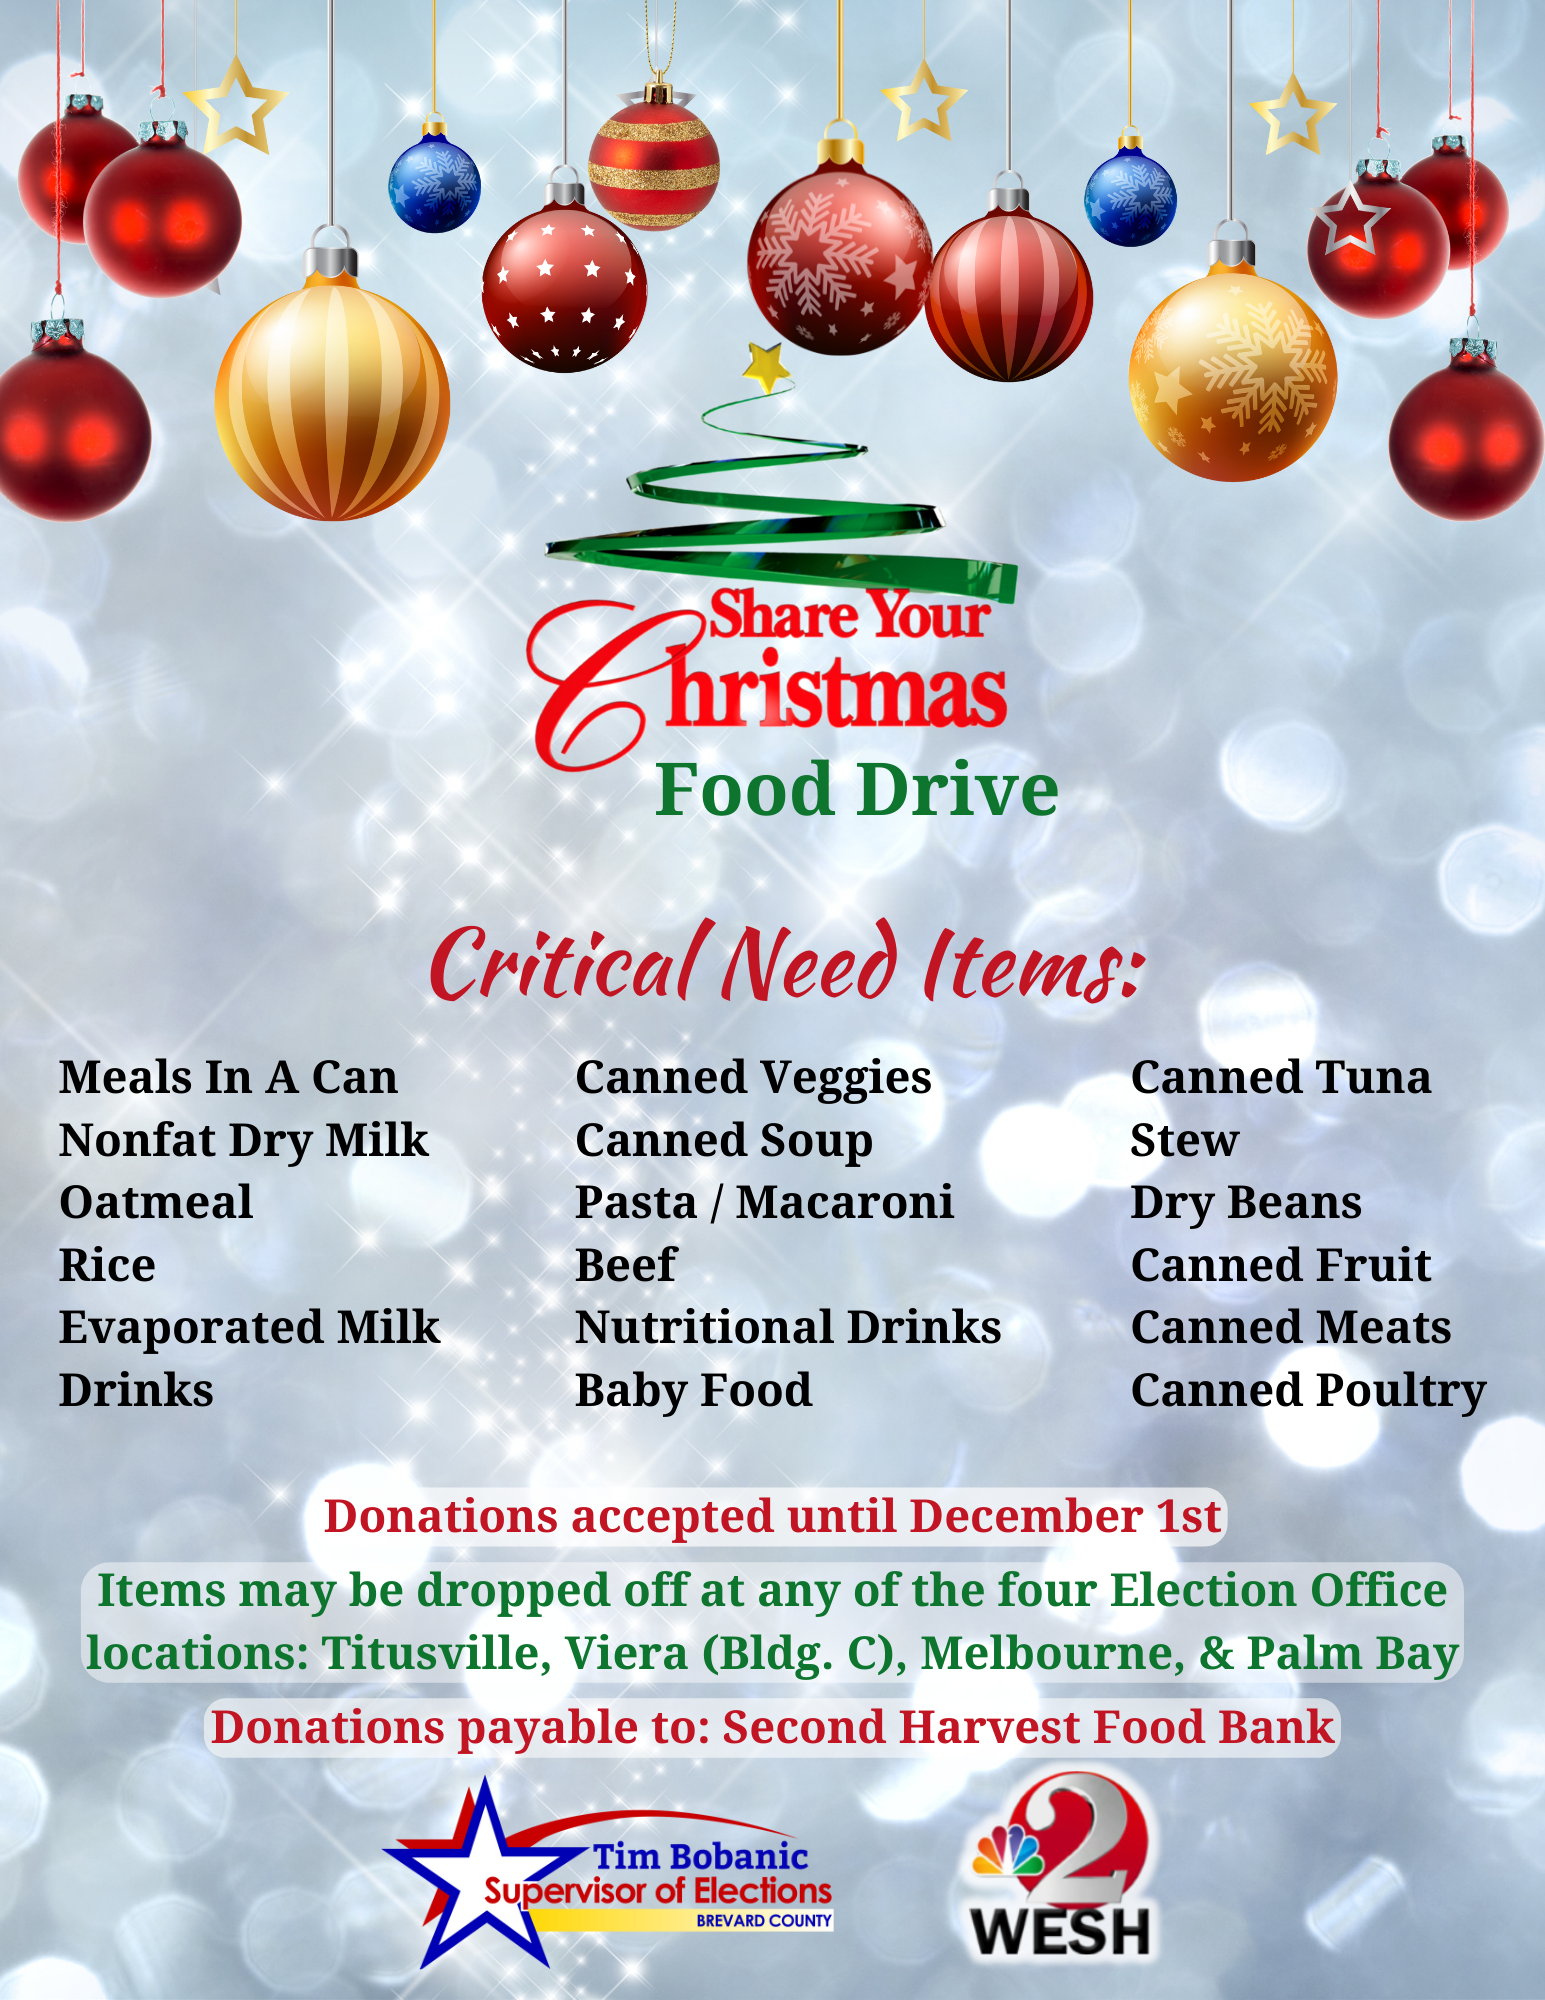 SYC Food Drive flyer